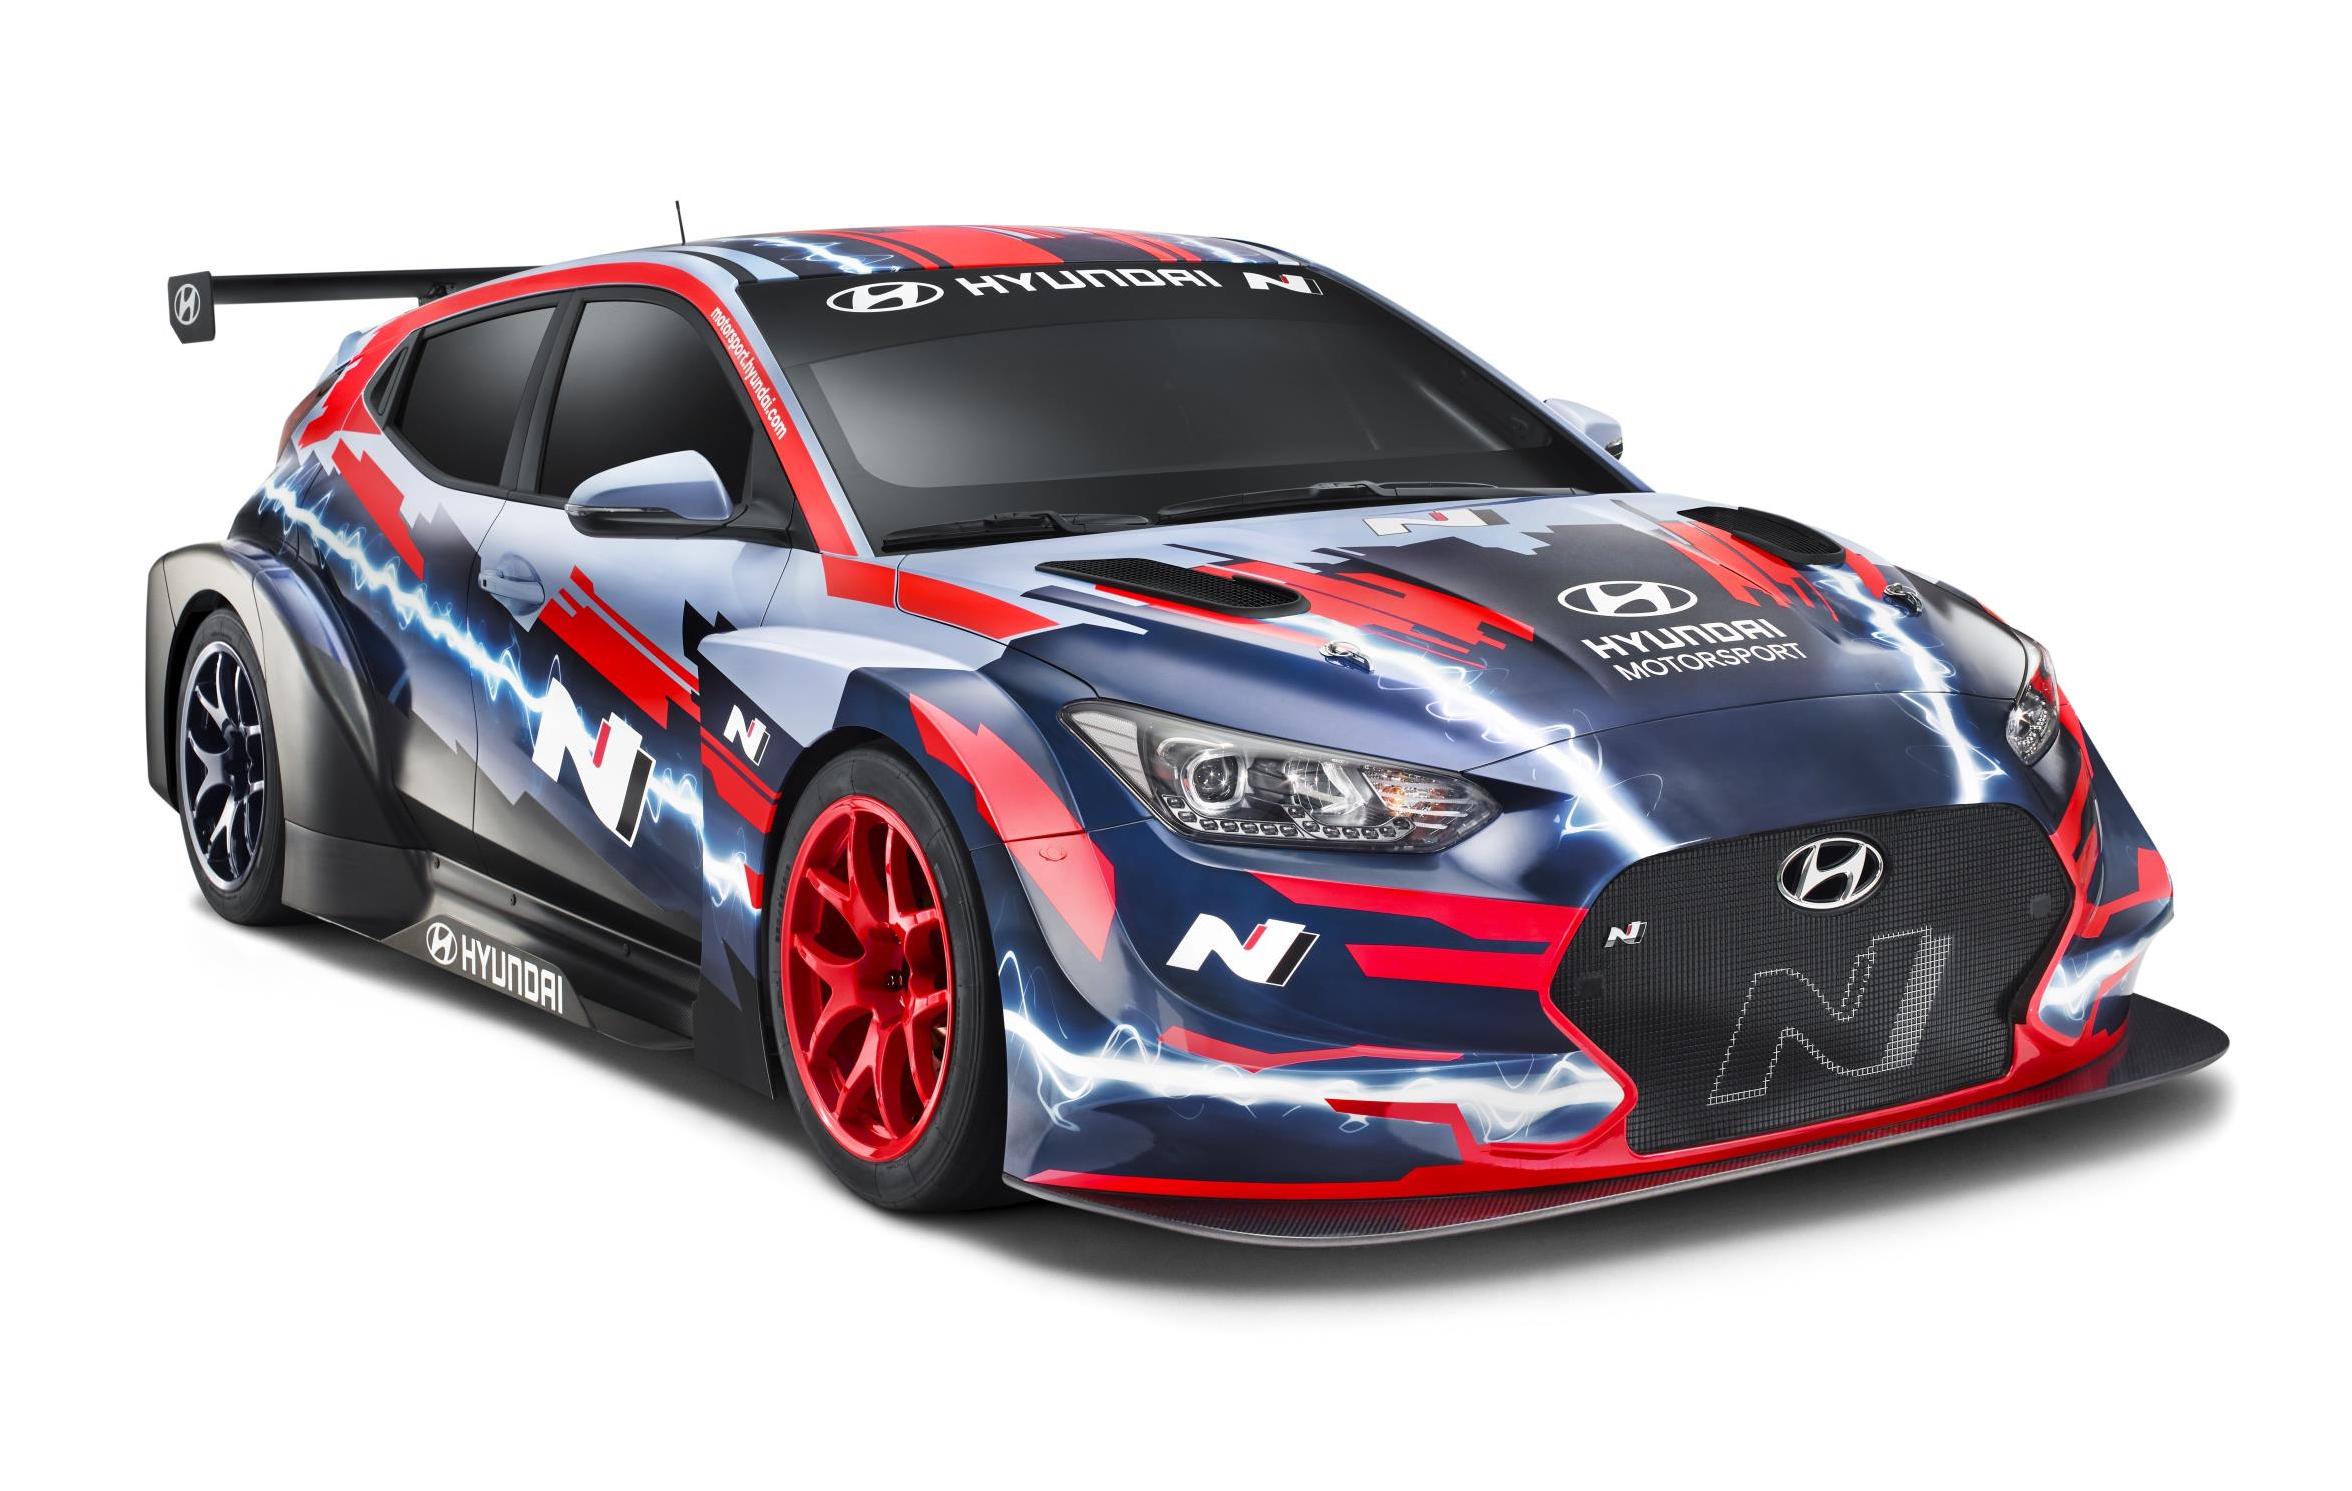 Hyundai Veloster N ETCR revealed, ready for electric racing